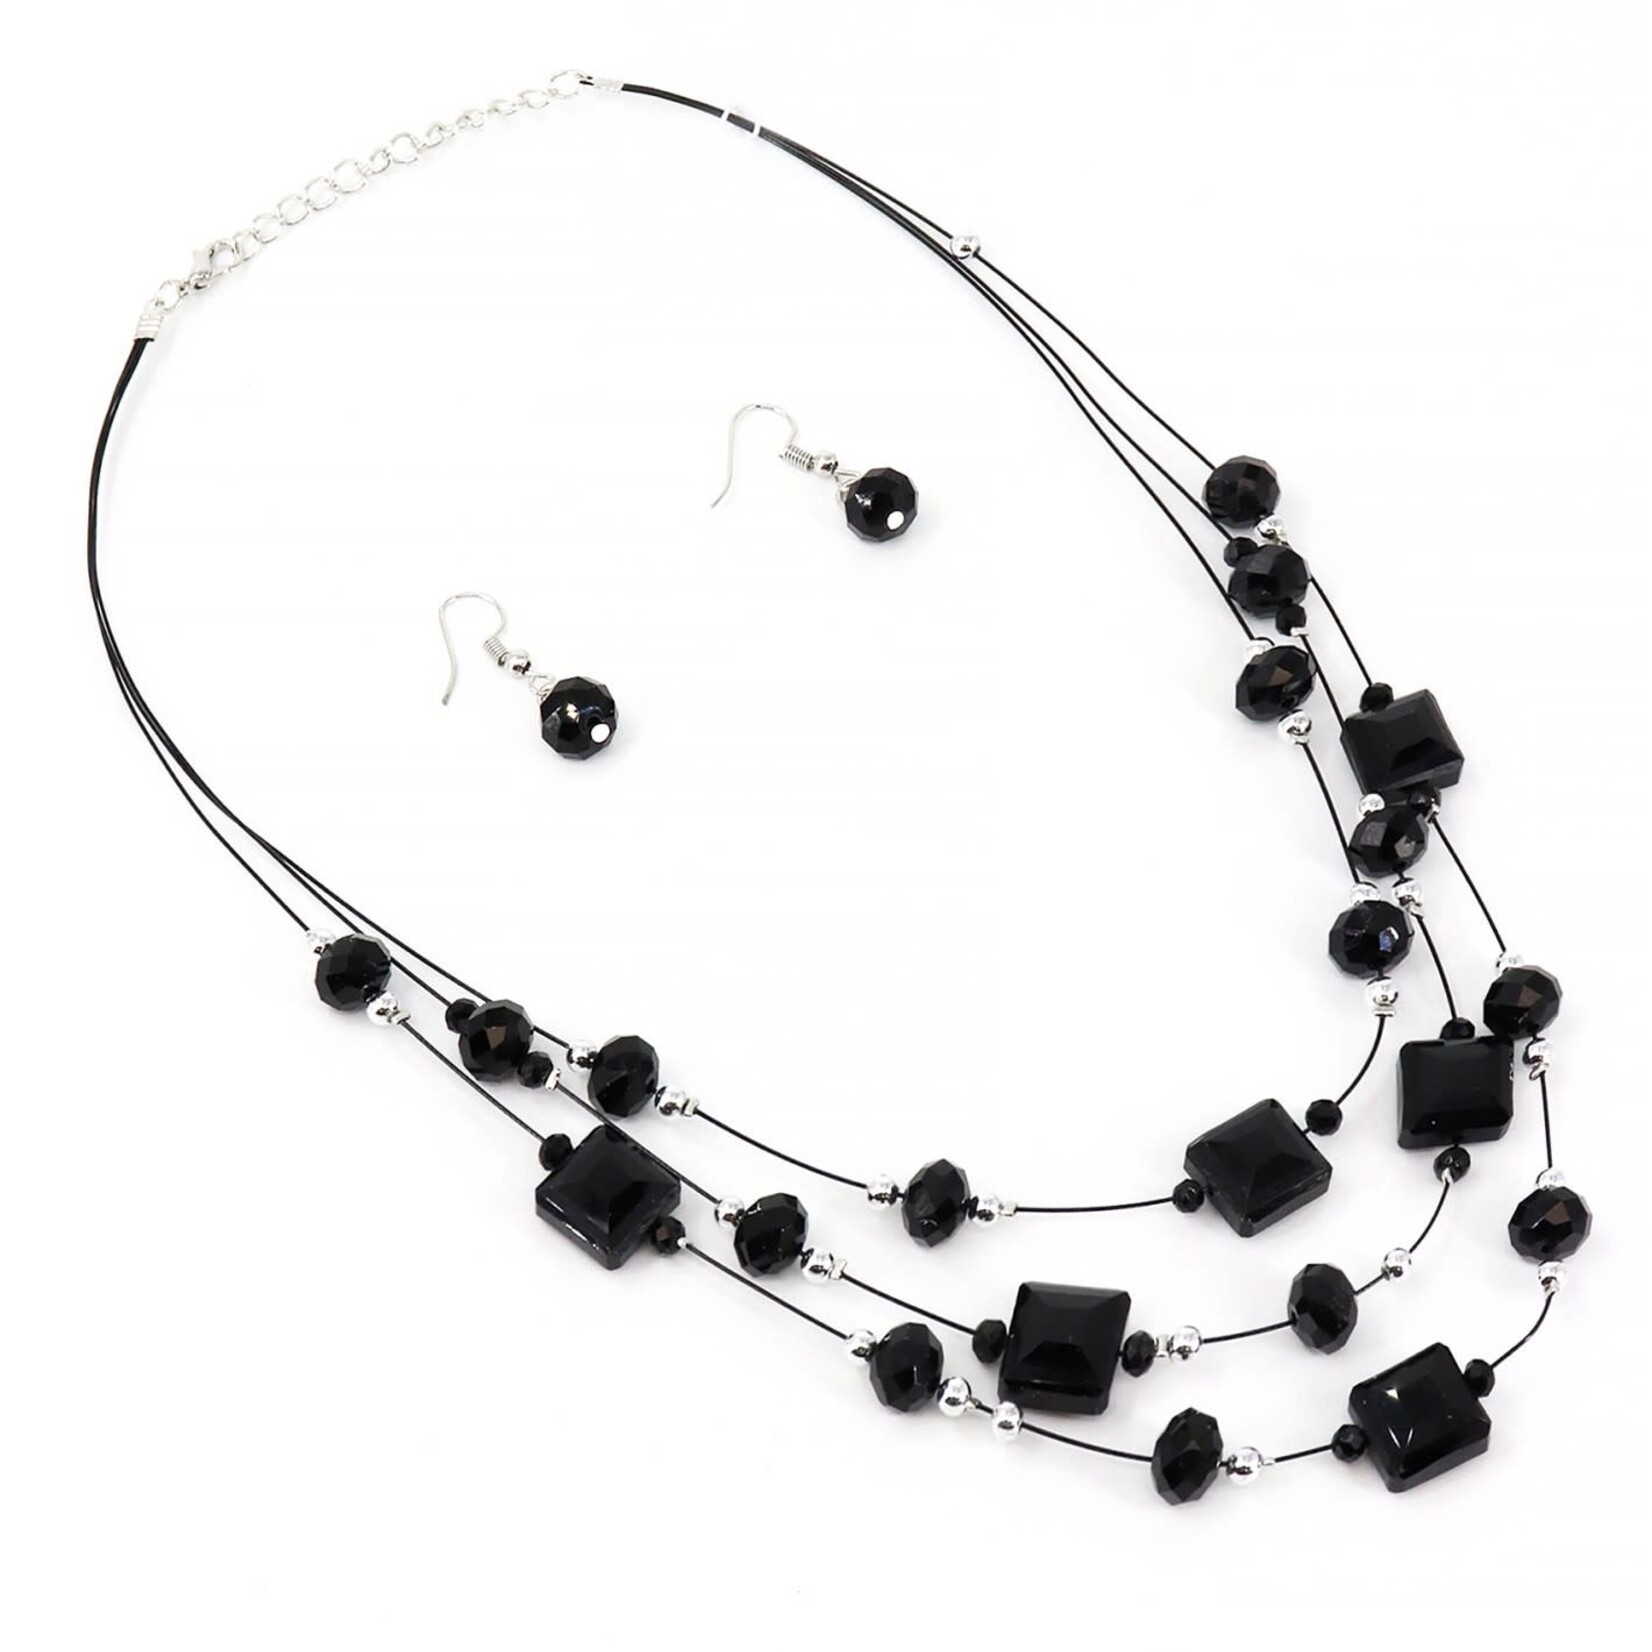 Mixed Beads Necklace and Earrings Set Black